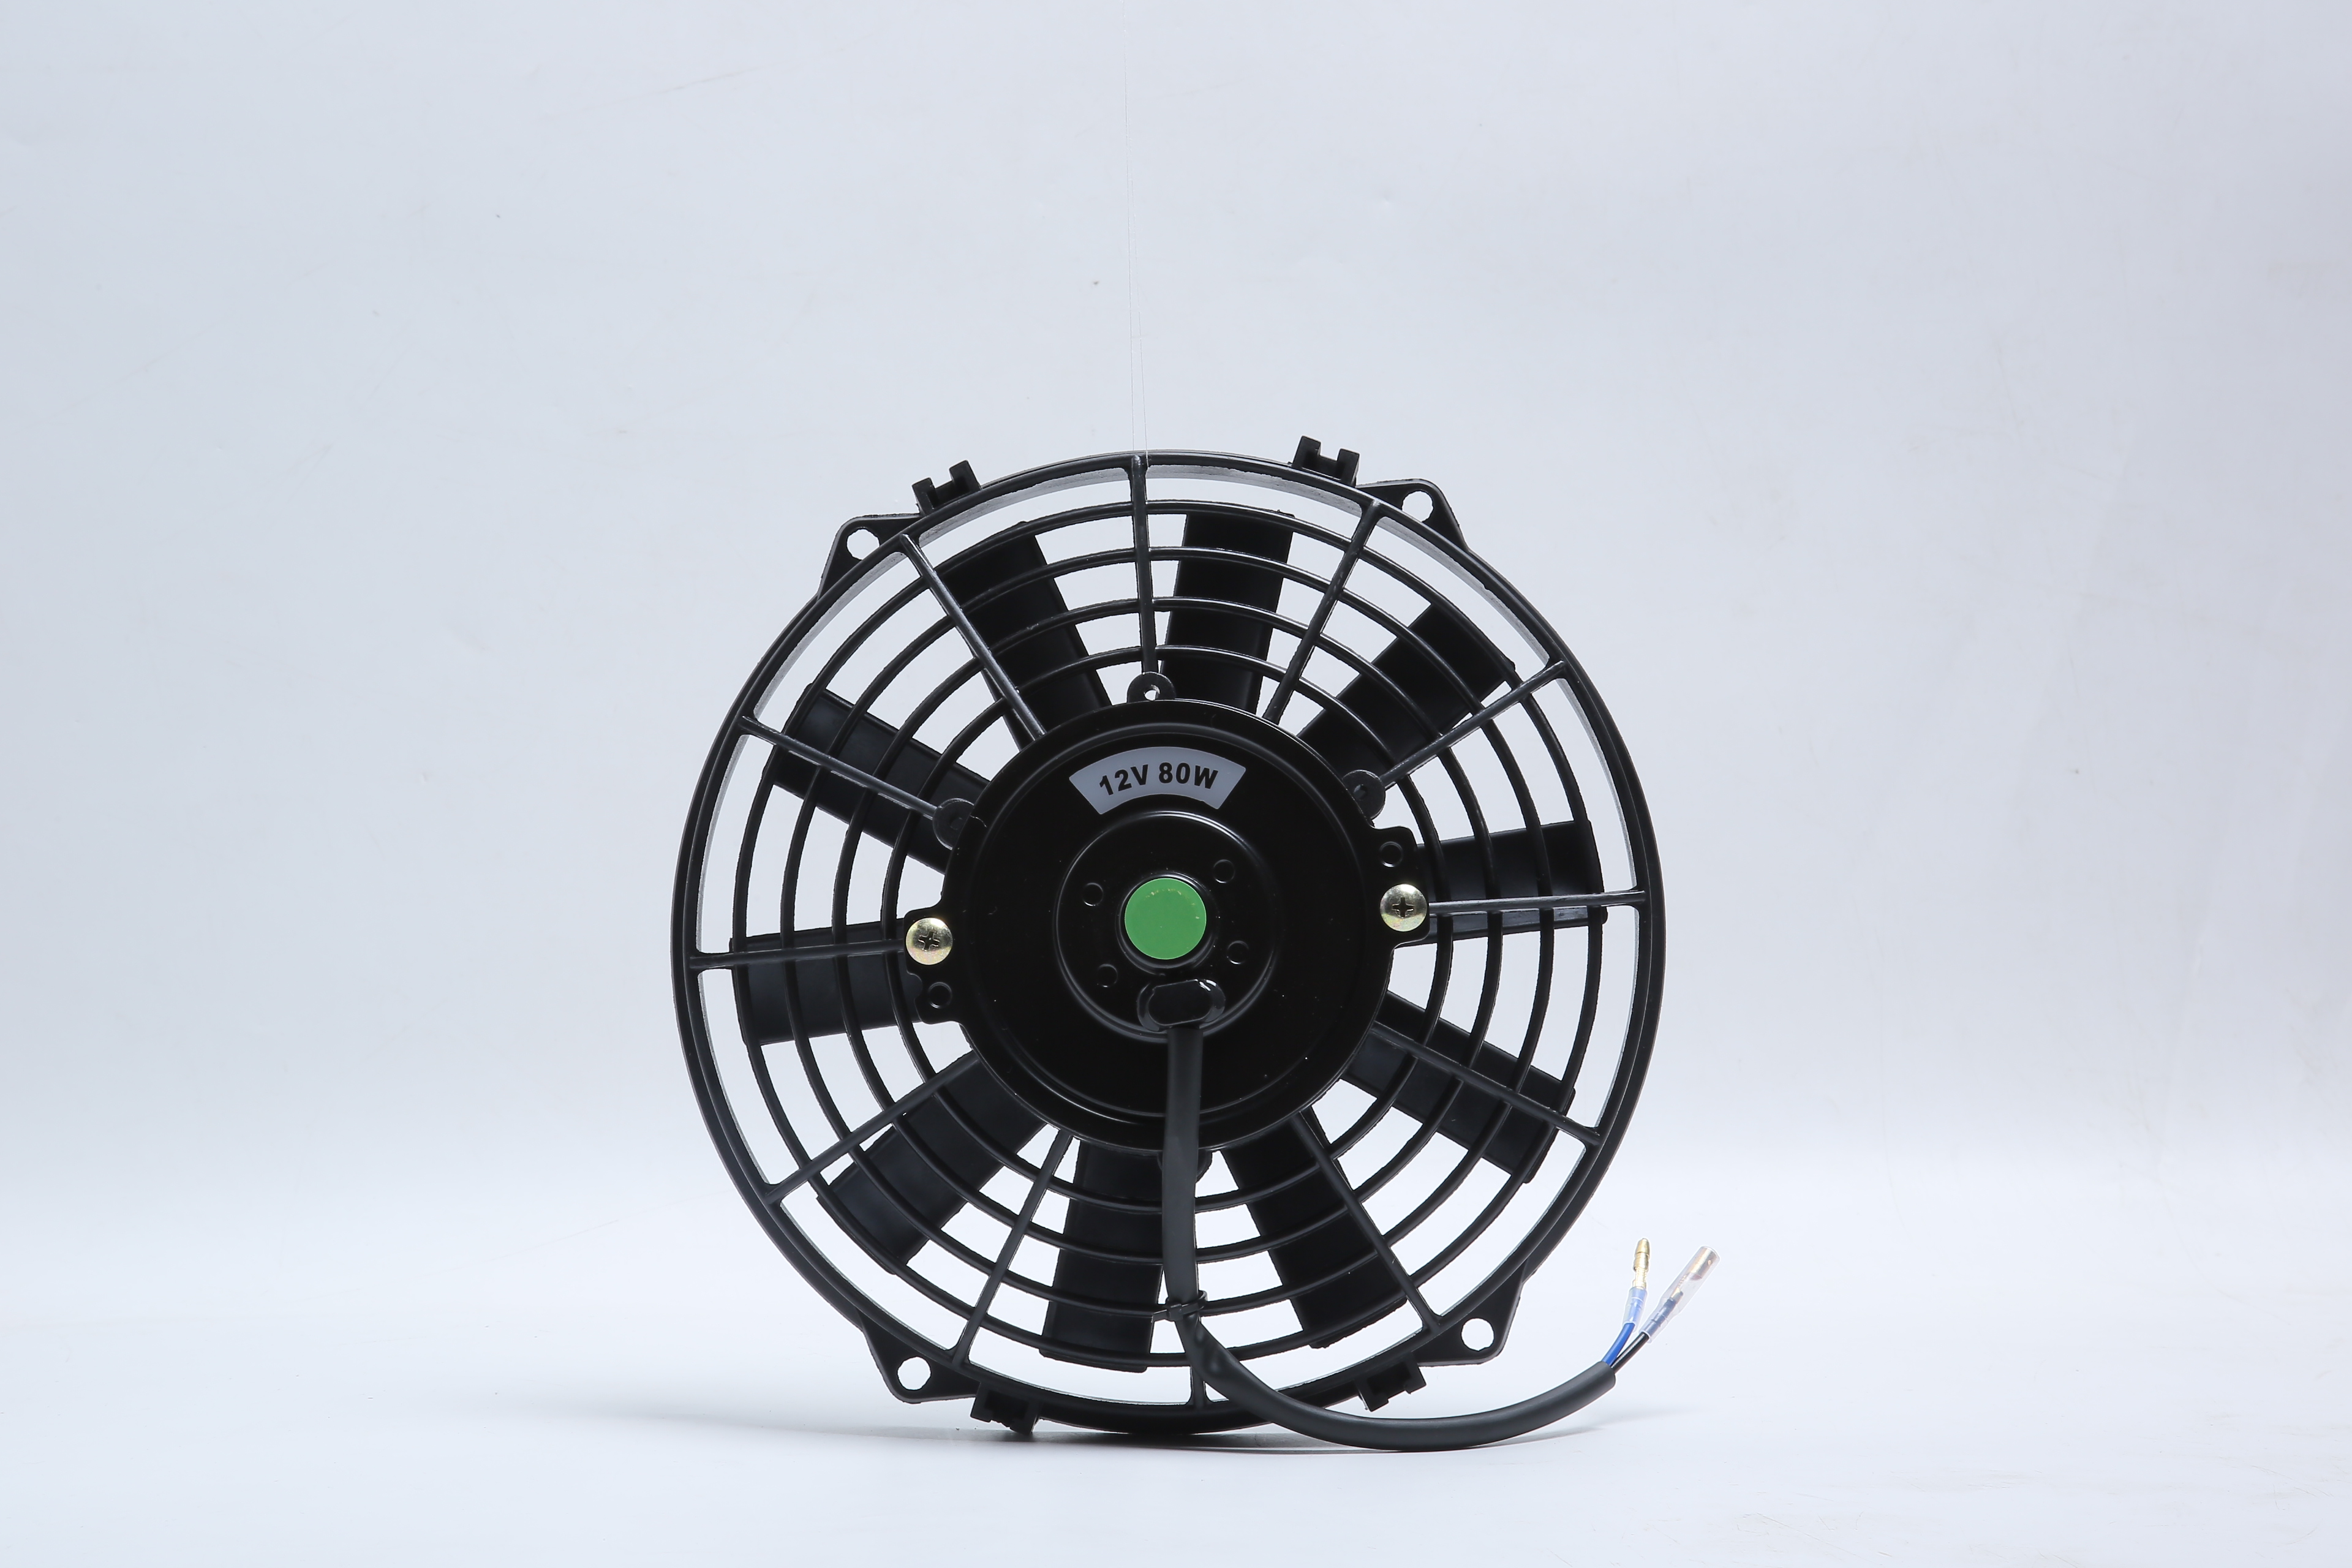  Wholesale DC 12V 80W 9inch Cooling Radiator Fan Blow/suction